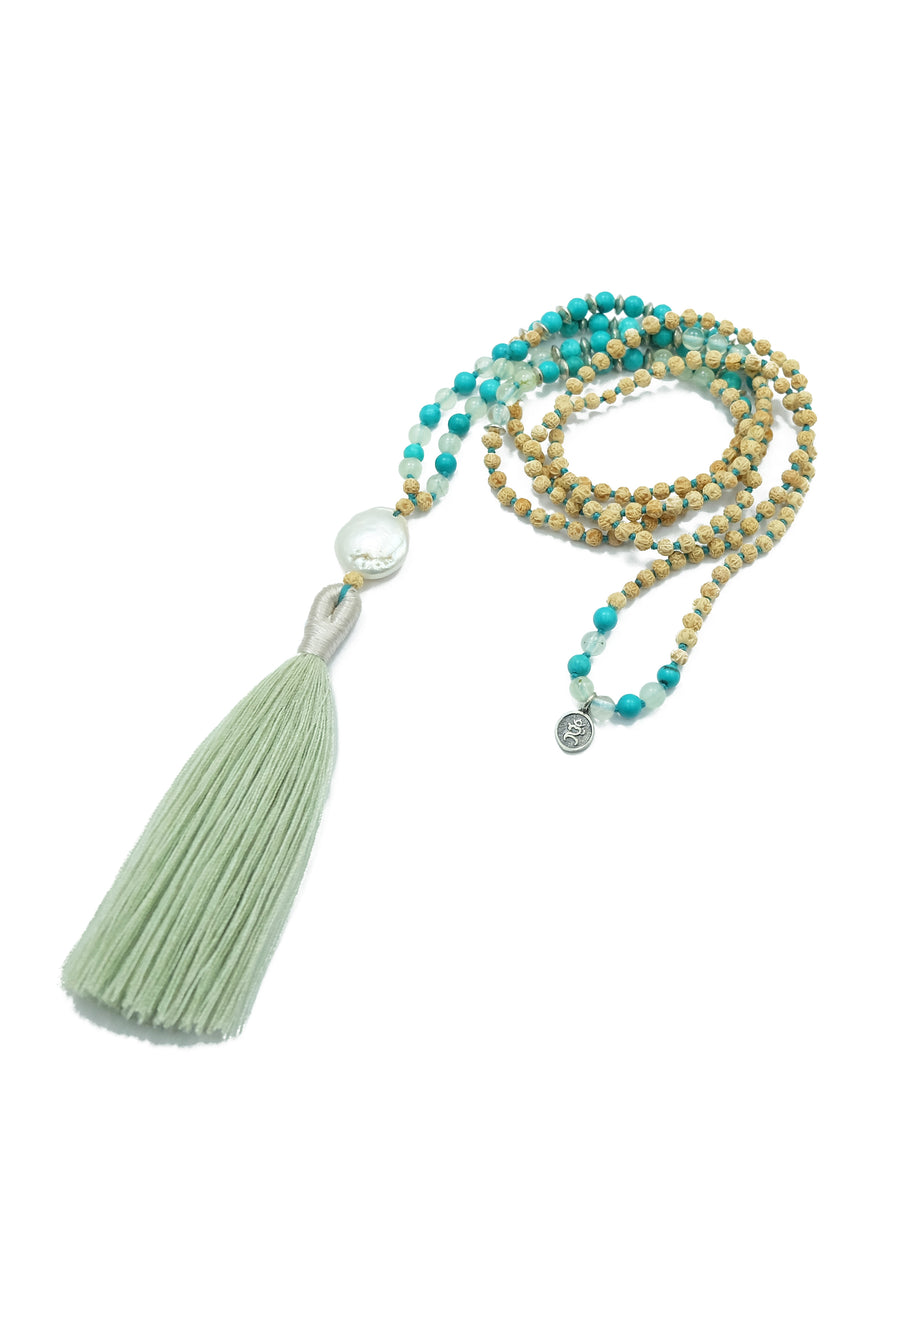 A captivating mala necklace named 'Lanikai Sunrise' with serene ocean-inspired colors. The mala features beautiful 4mm prehnite, turquoise gemstones, and rudrani seeds, complemented by elegant sterling silver accents. At its heart, a shimmering freshwater pearl pendant adds a touch of sophistication. Experience the bliss of floating weightless in heavenly waves under the tropical sun with this enchanting mala.